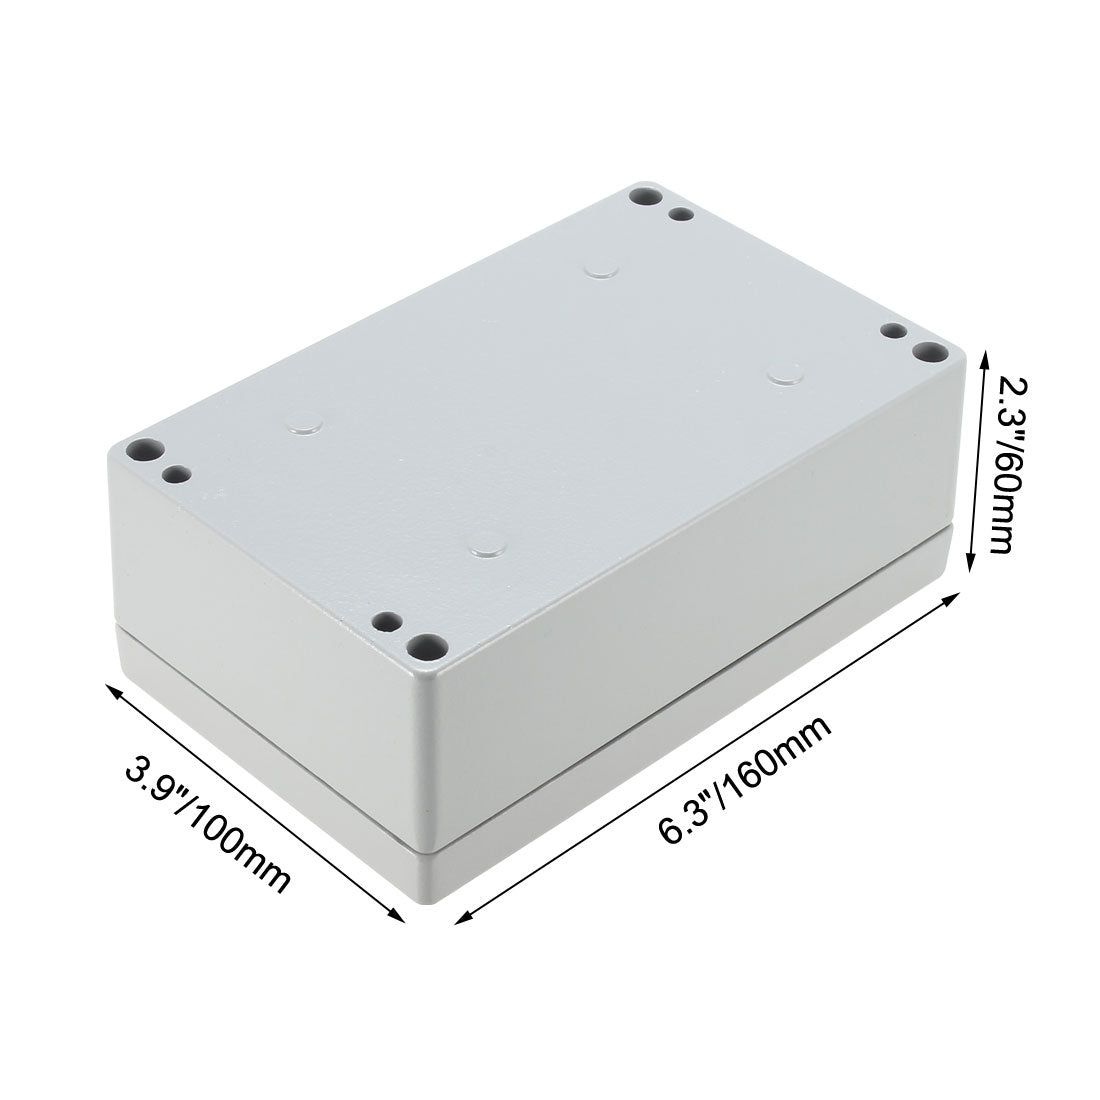 uxcell Uxcell 6.3"x3.9"x2.3"(160mmx100mmx60mm) Aluminum Junction Box Universal Electric Project Enclosure